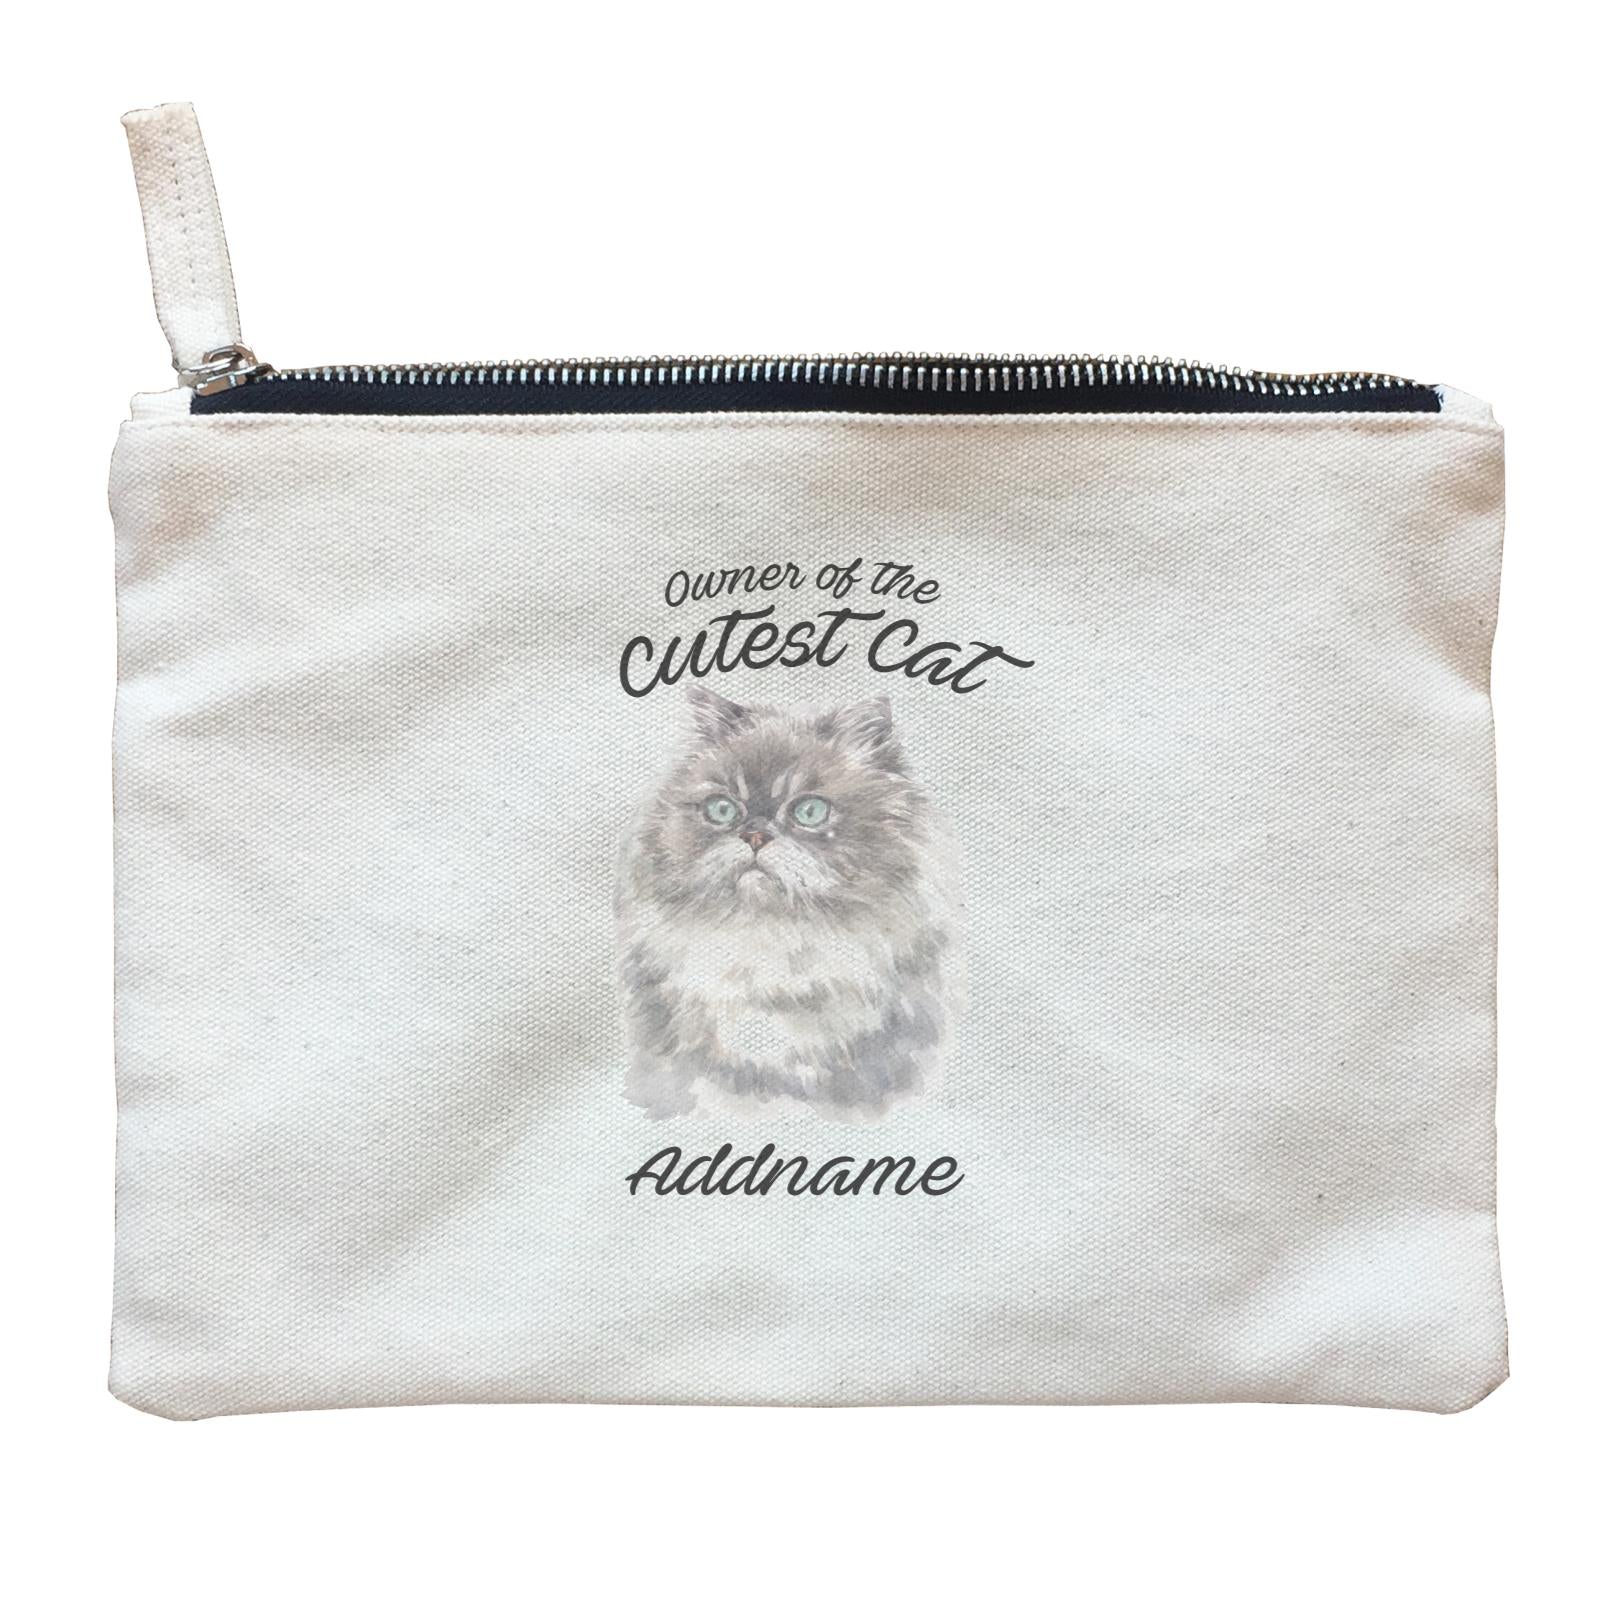 Watercolor Owner Of The Cutest Cat Himalayan Addname Zipper Pouch